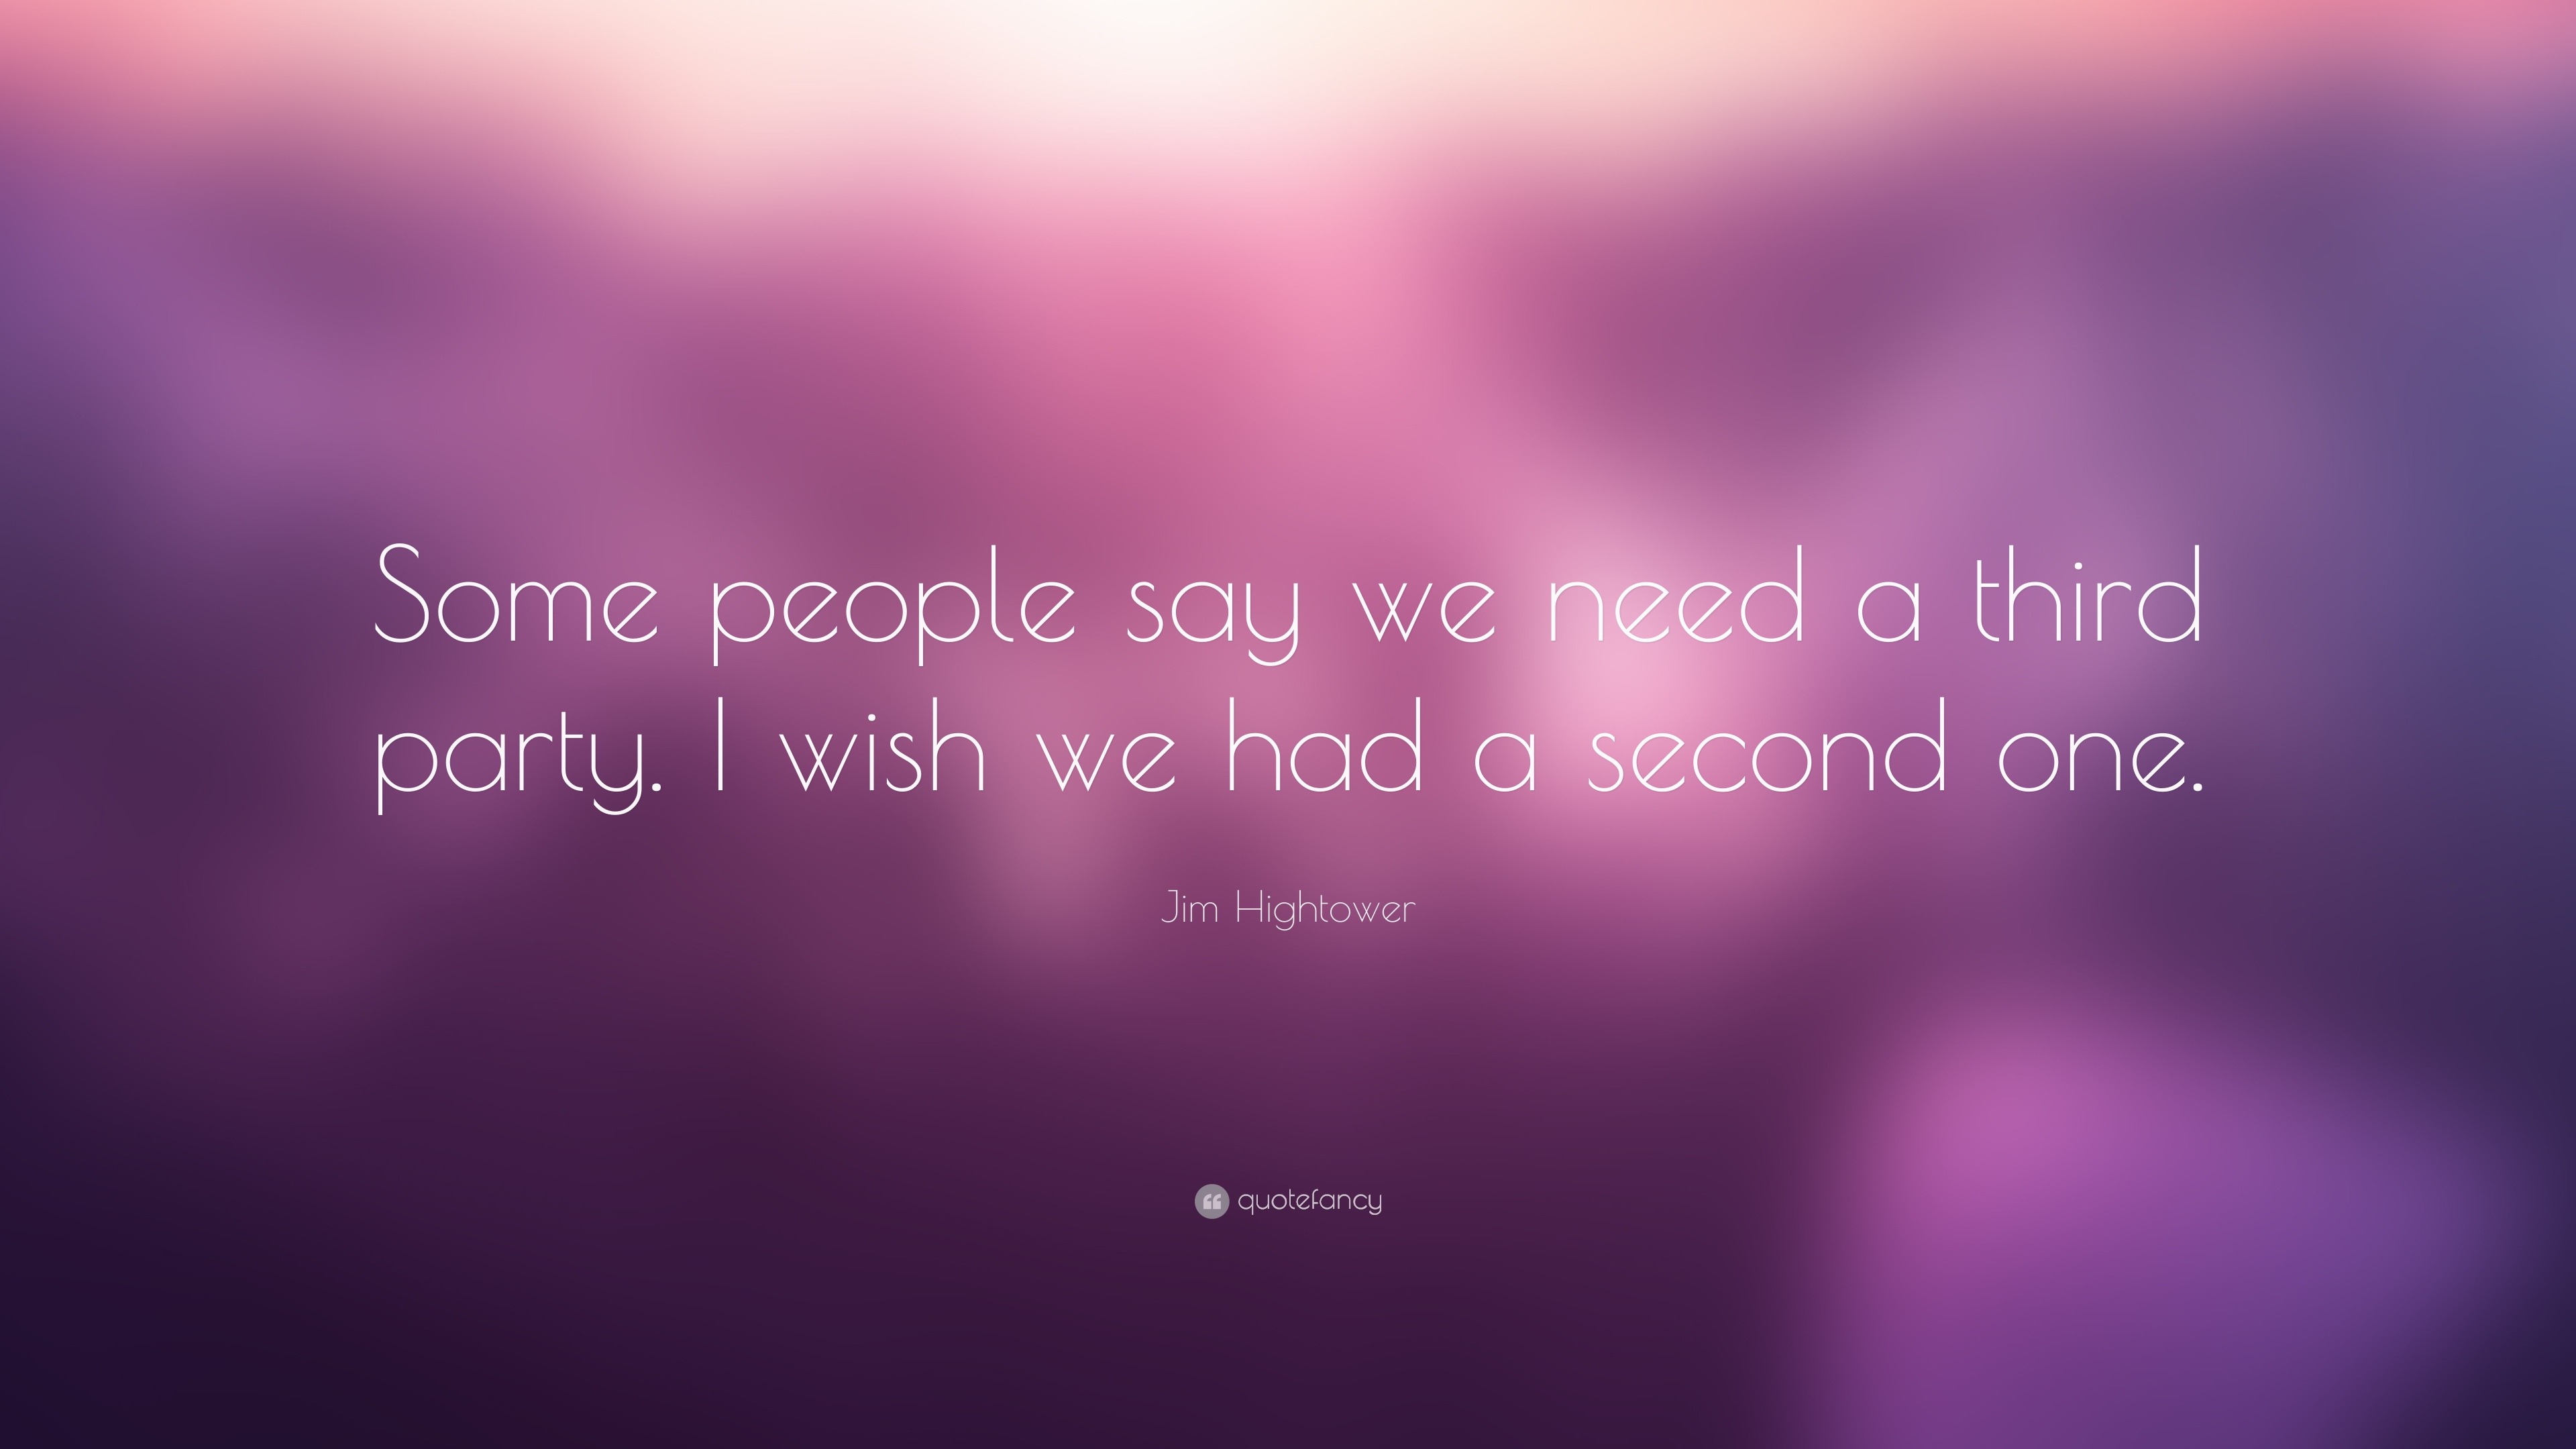 Jim Hightower Quote: “Some people say we need a third party. I wish we ...